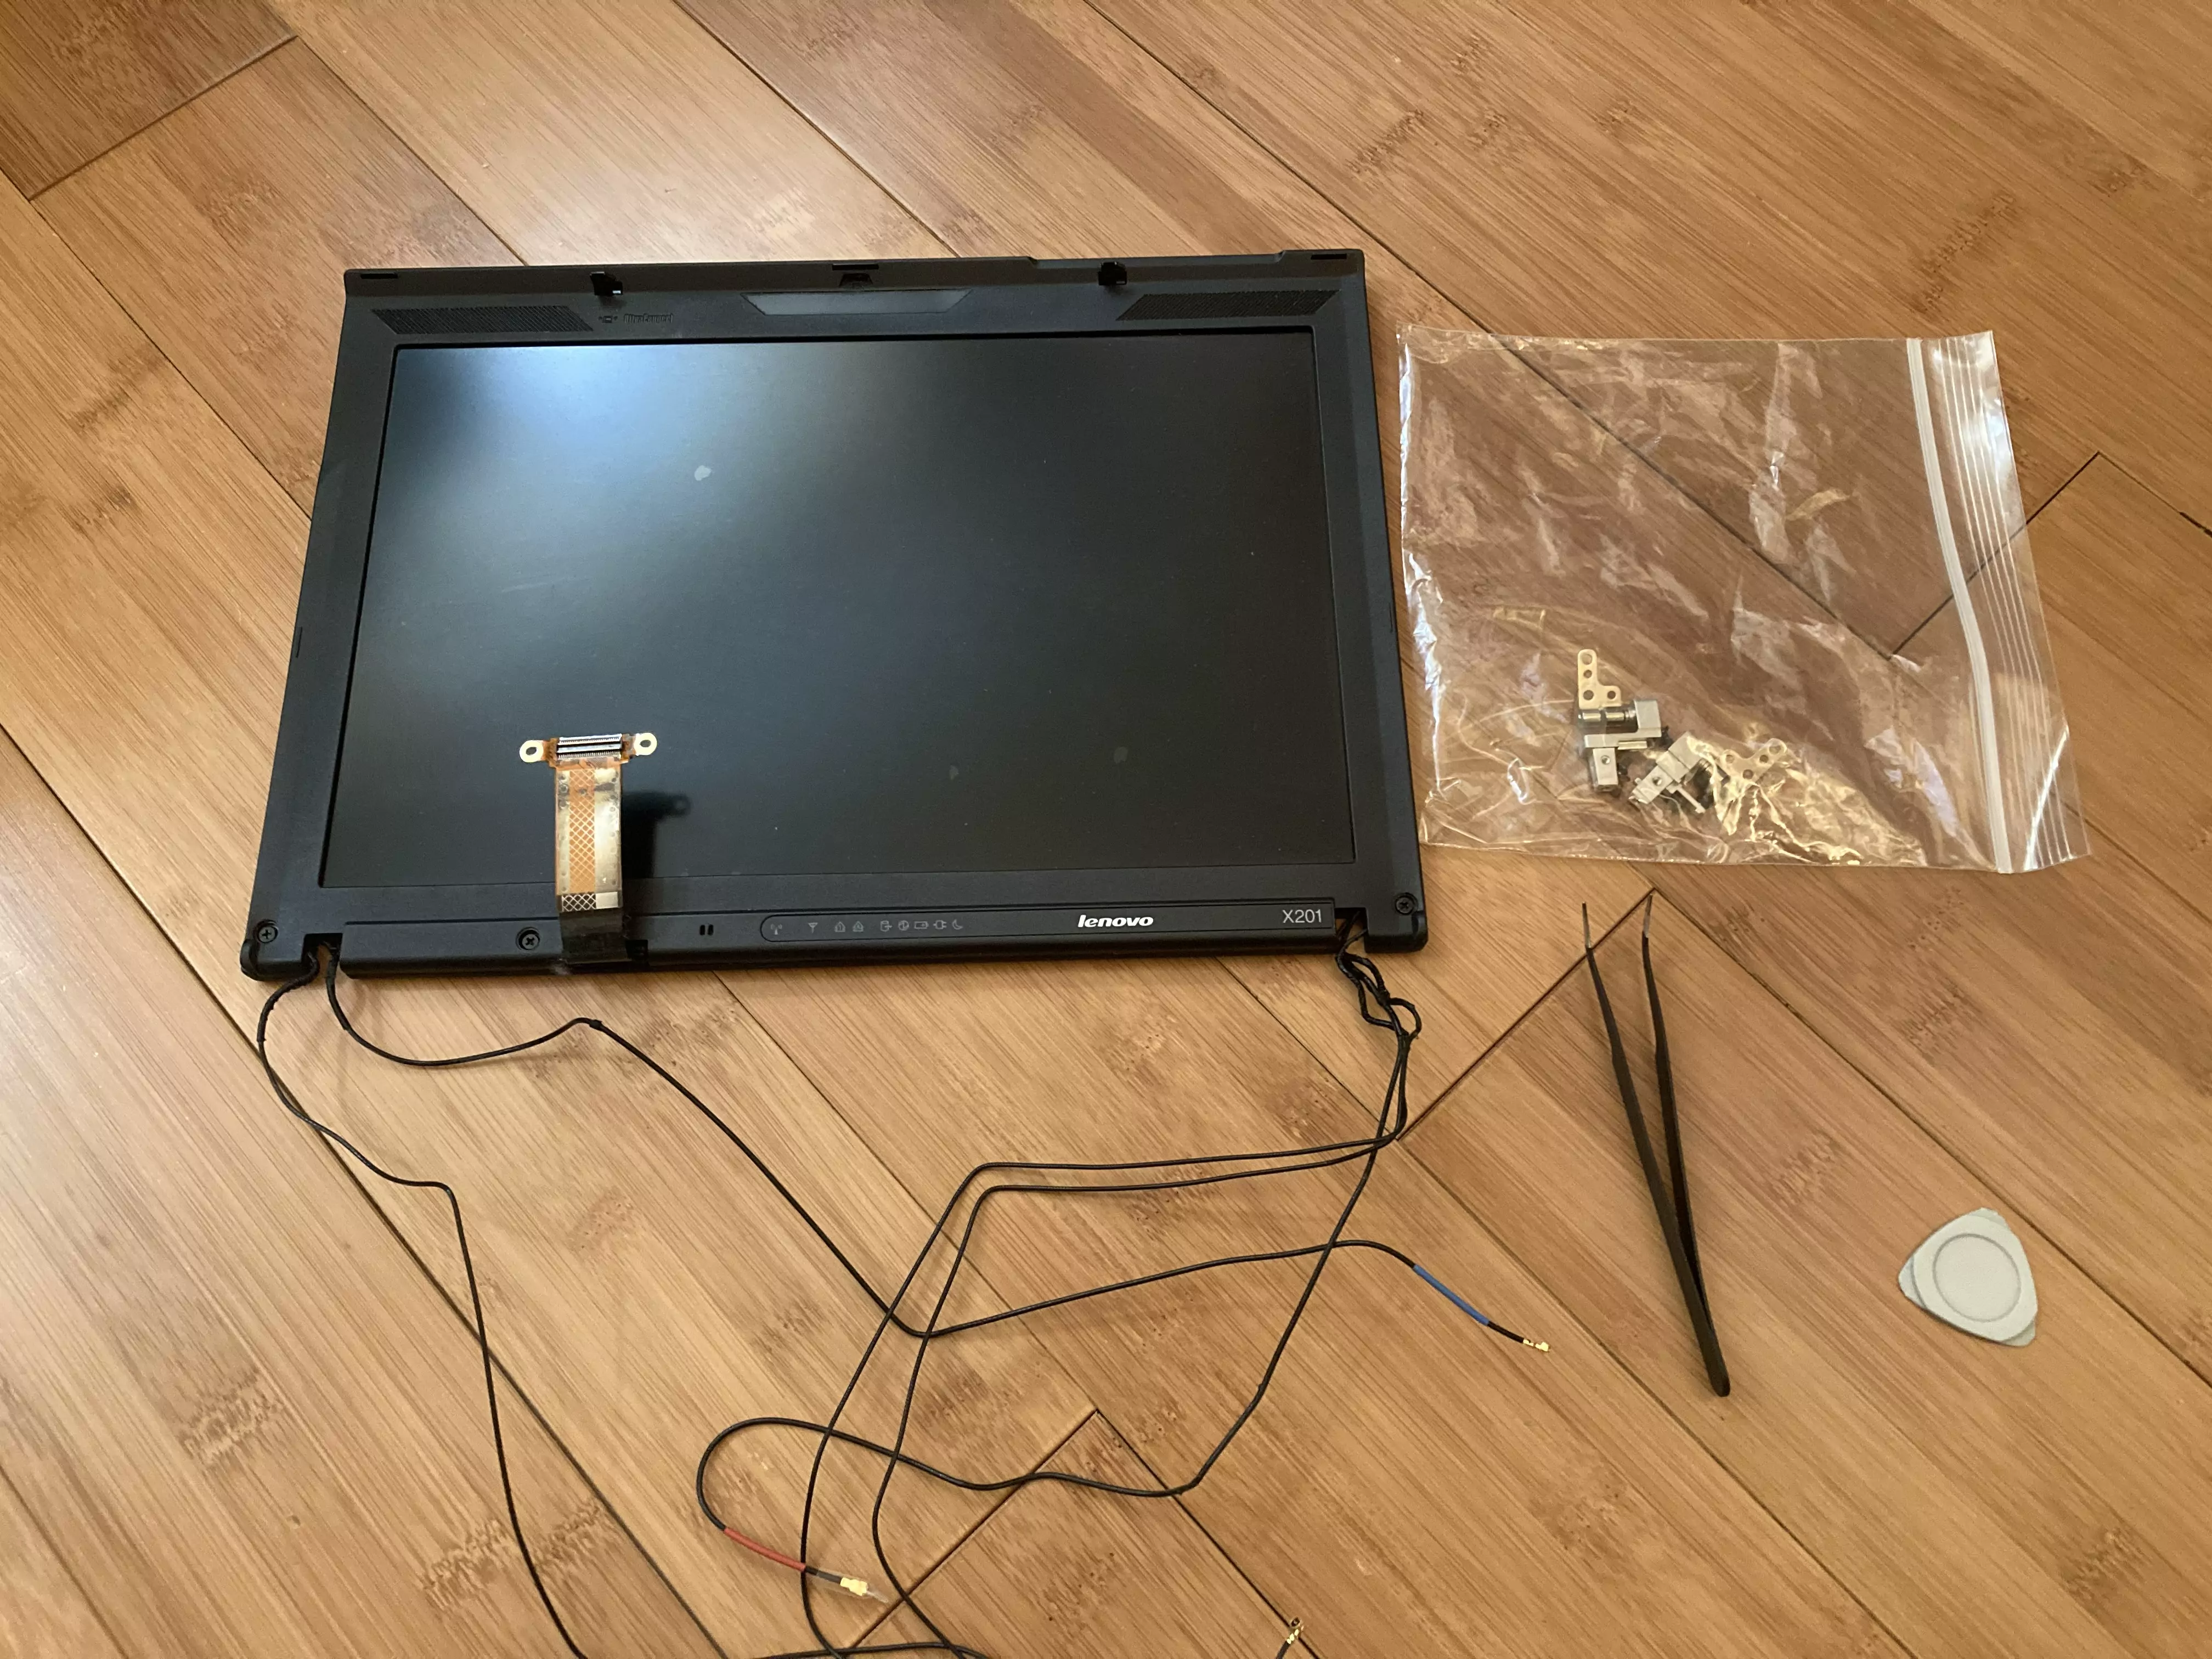 The main X201 display and lid disconnected